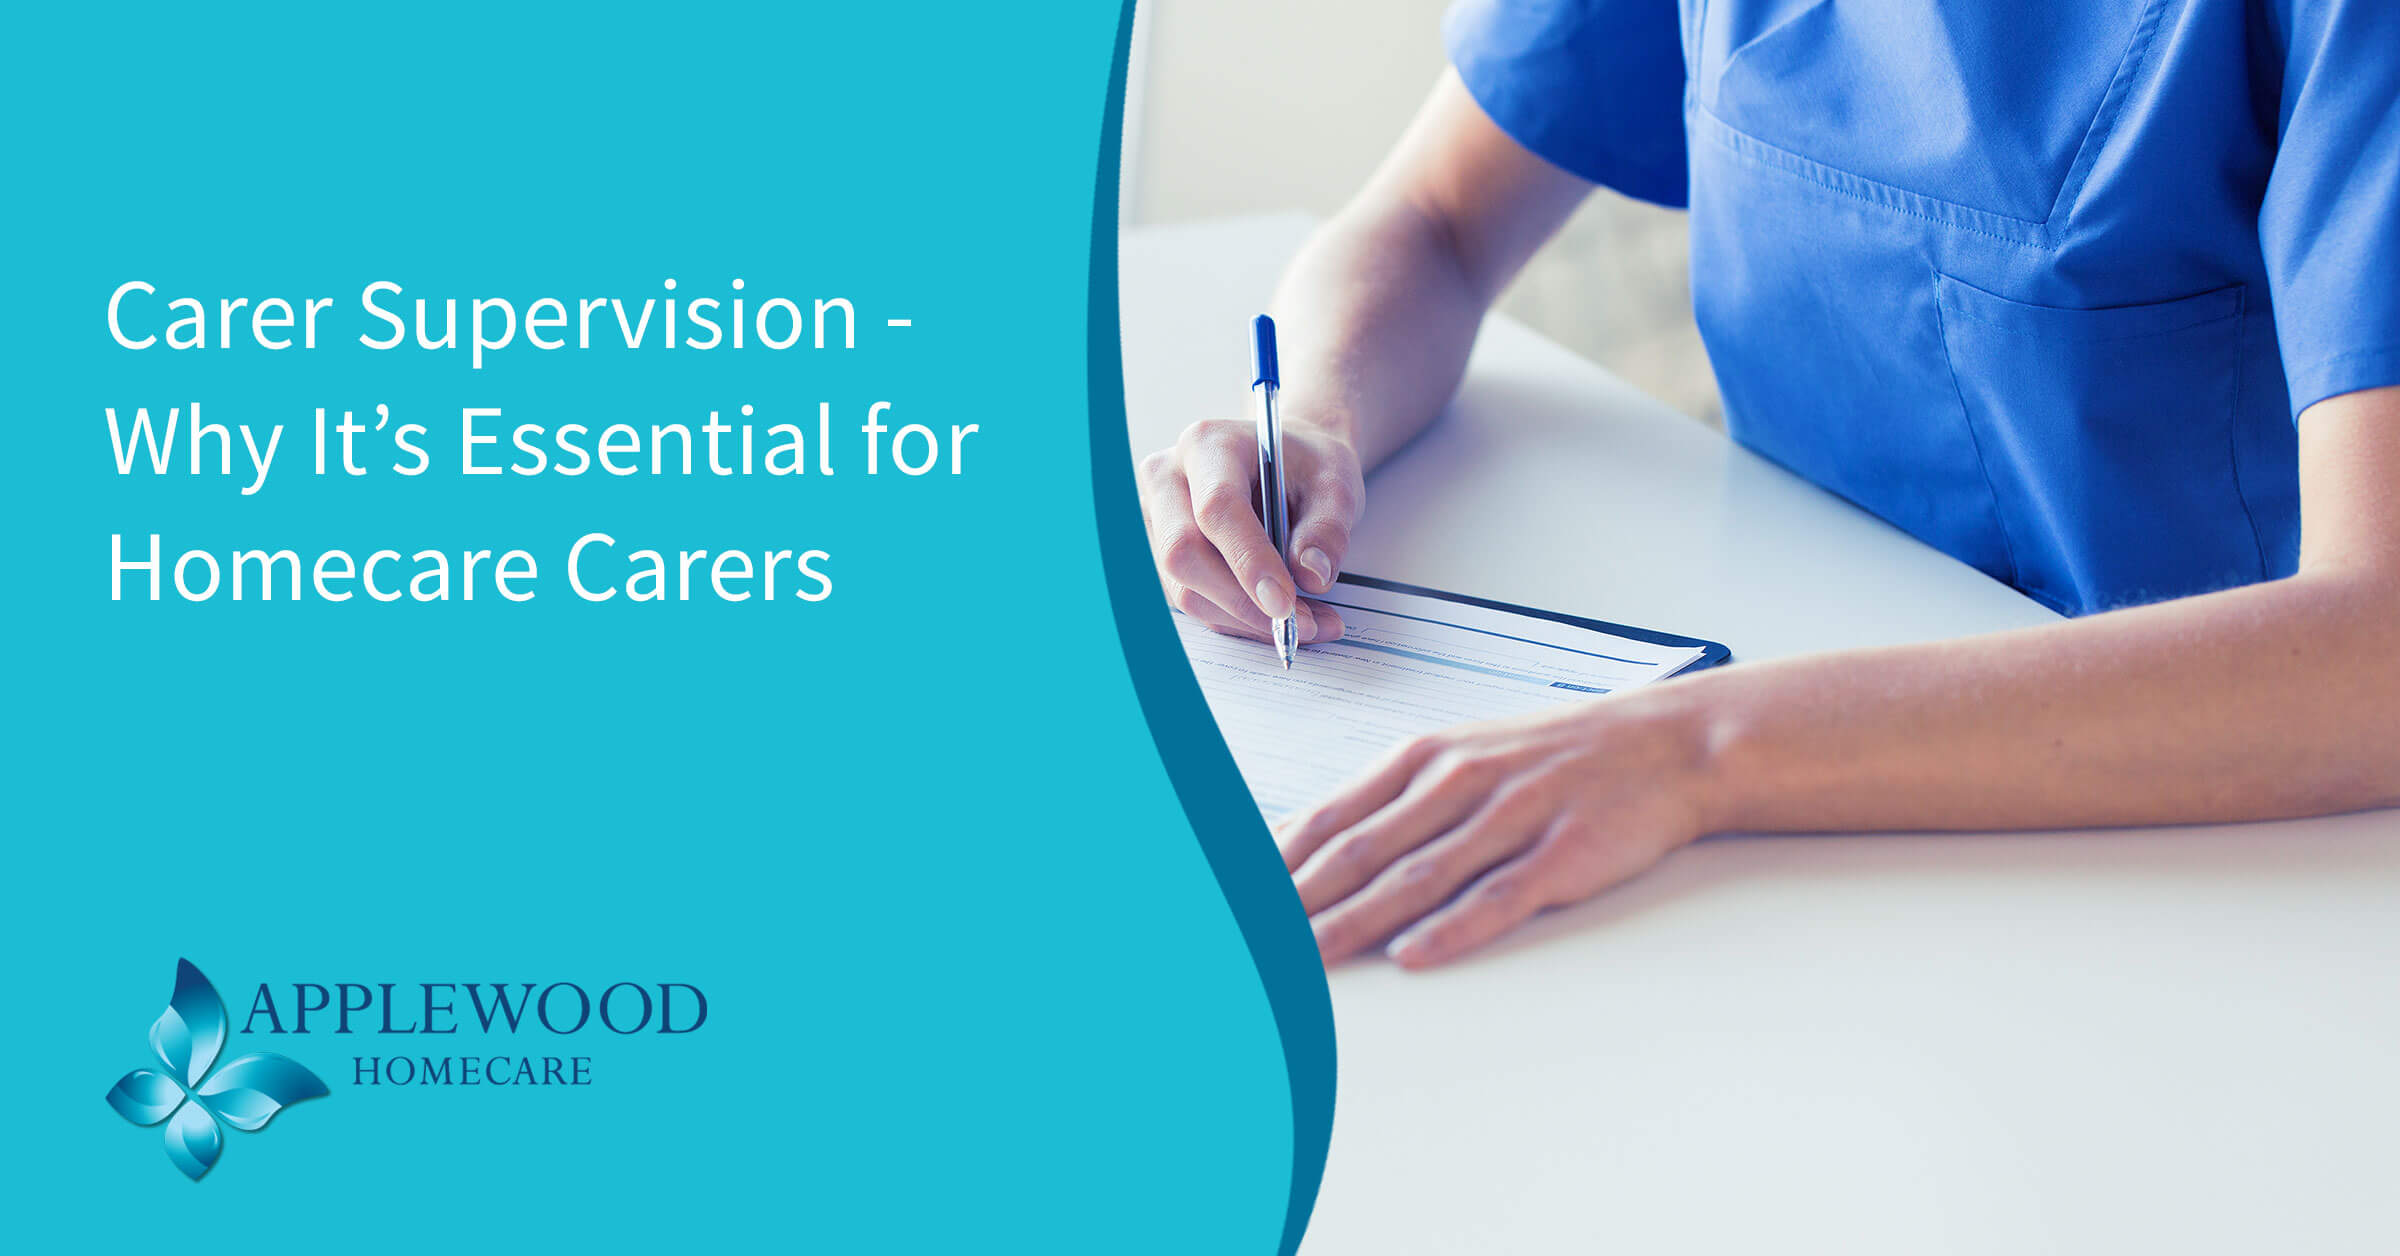 Why carer supervision is essential for homecare carers